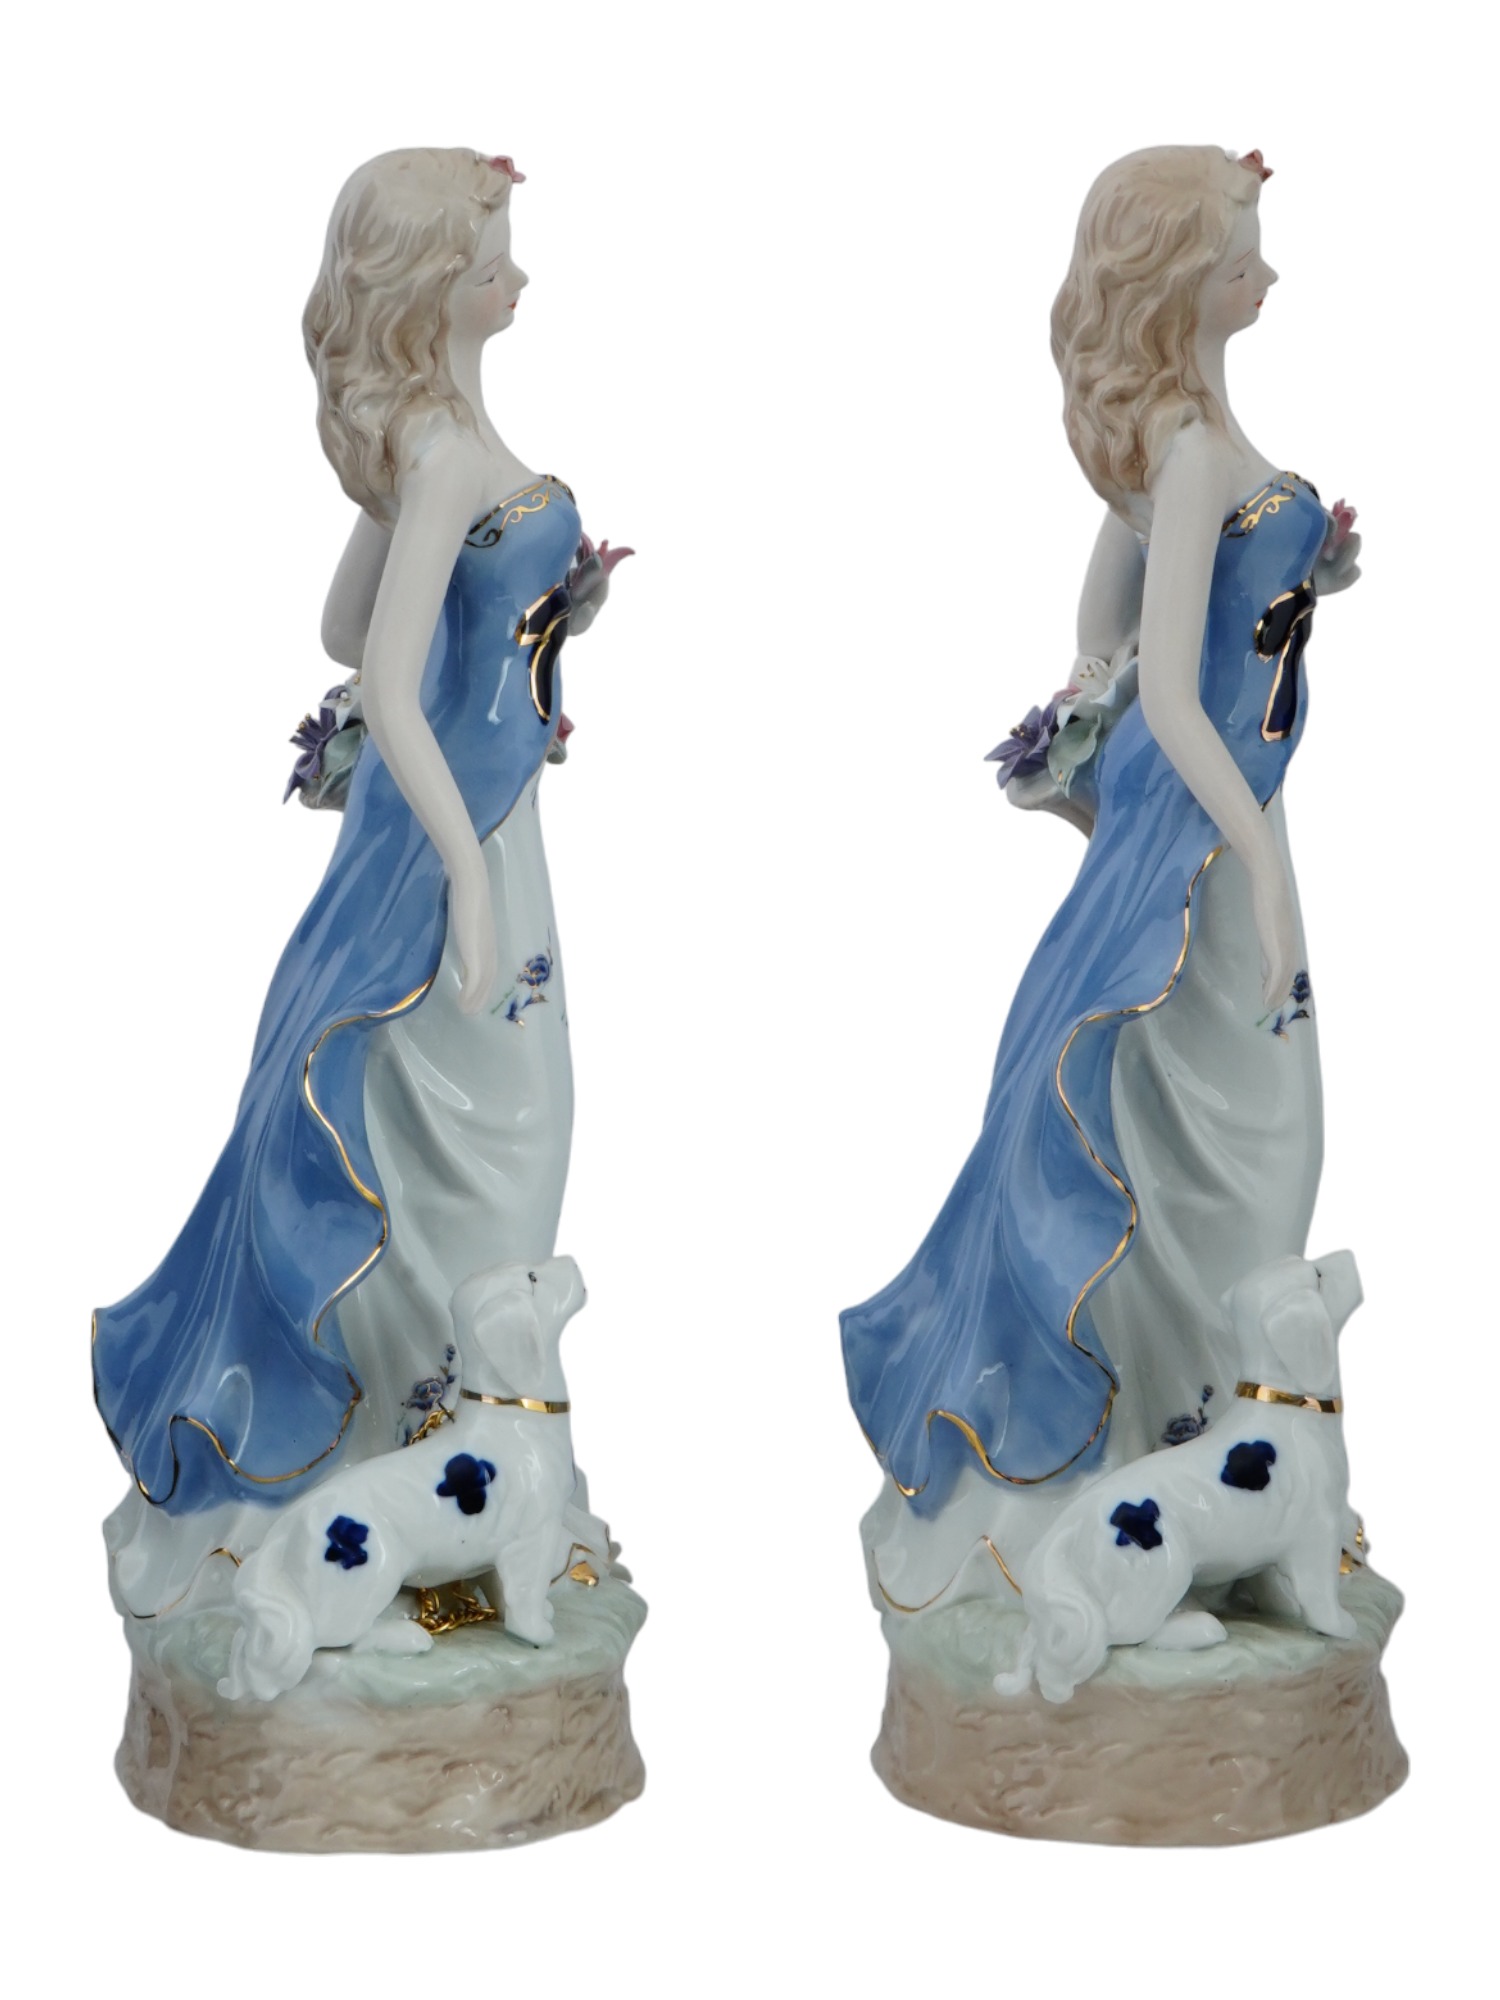 LARGE VINTAGE PORCELAIN FEMALE FIGURINES WITH DOGS PIC-1